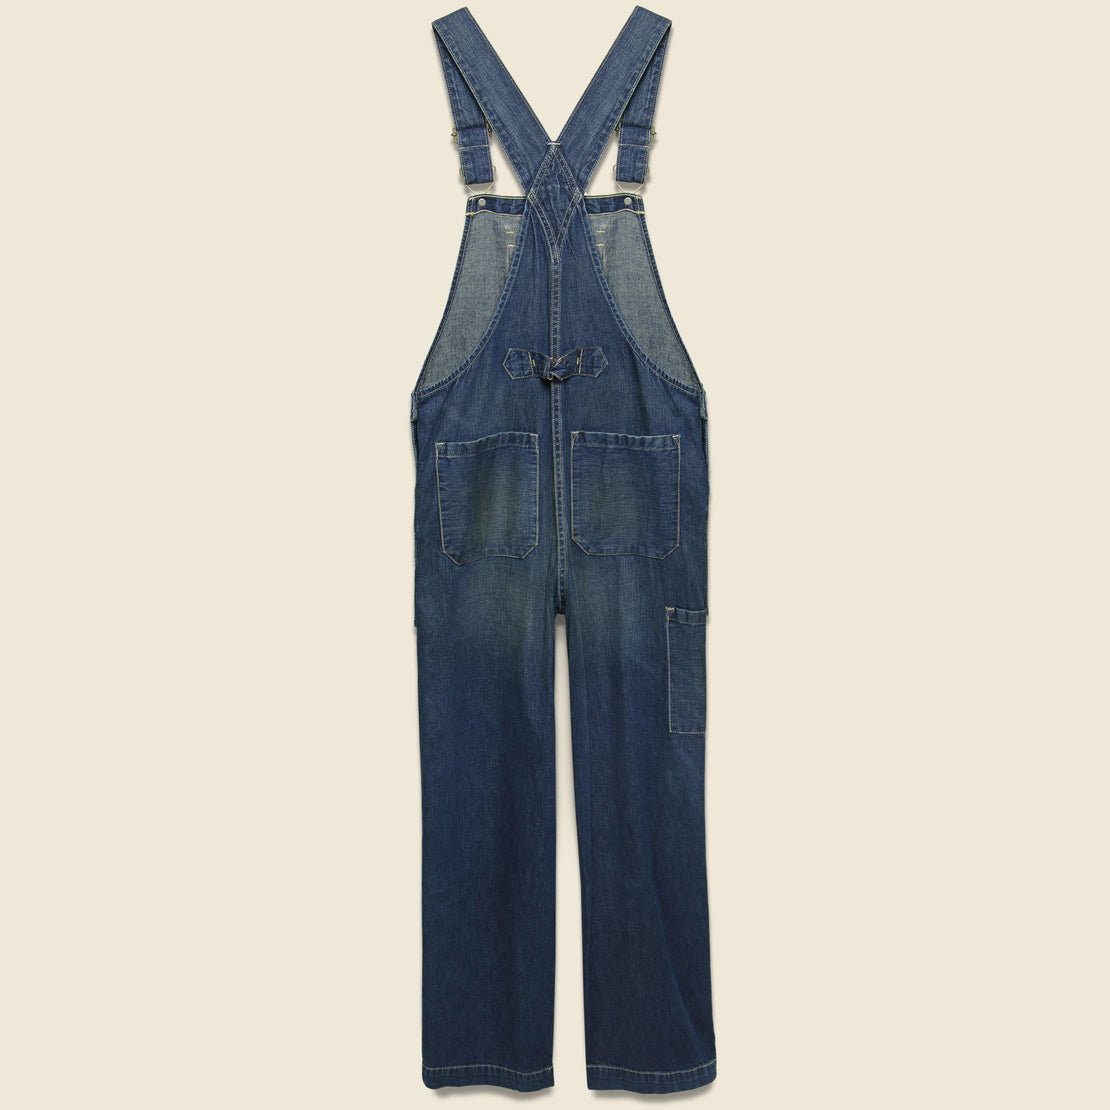 Denim Overall - Jamie Wash - RRL - STAG Provisions - W - Onepiece - Overalls